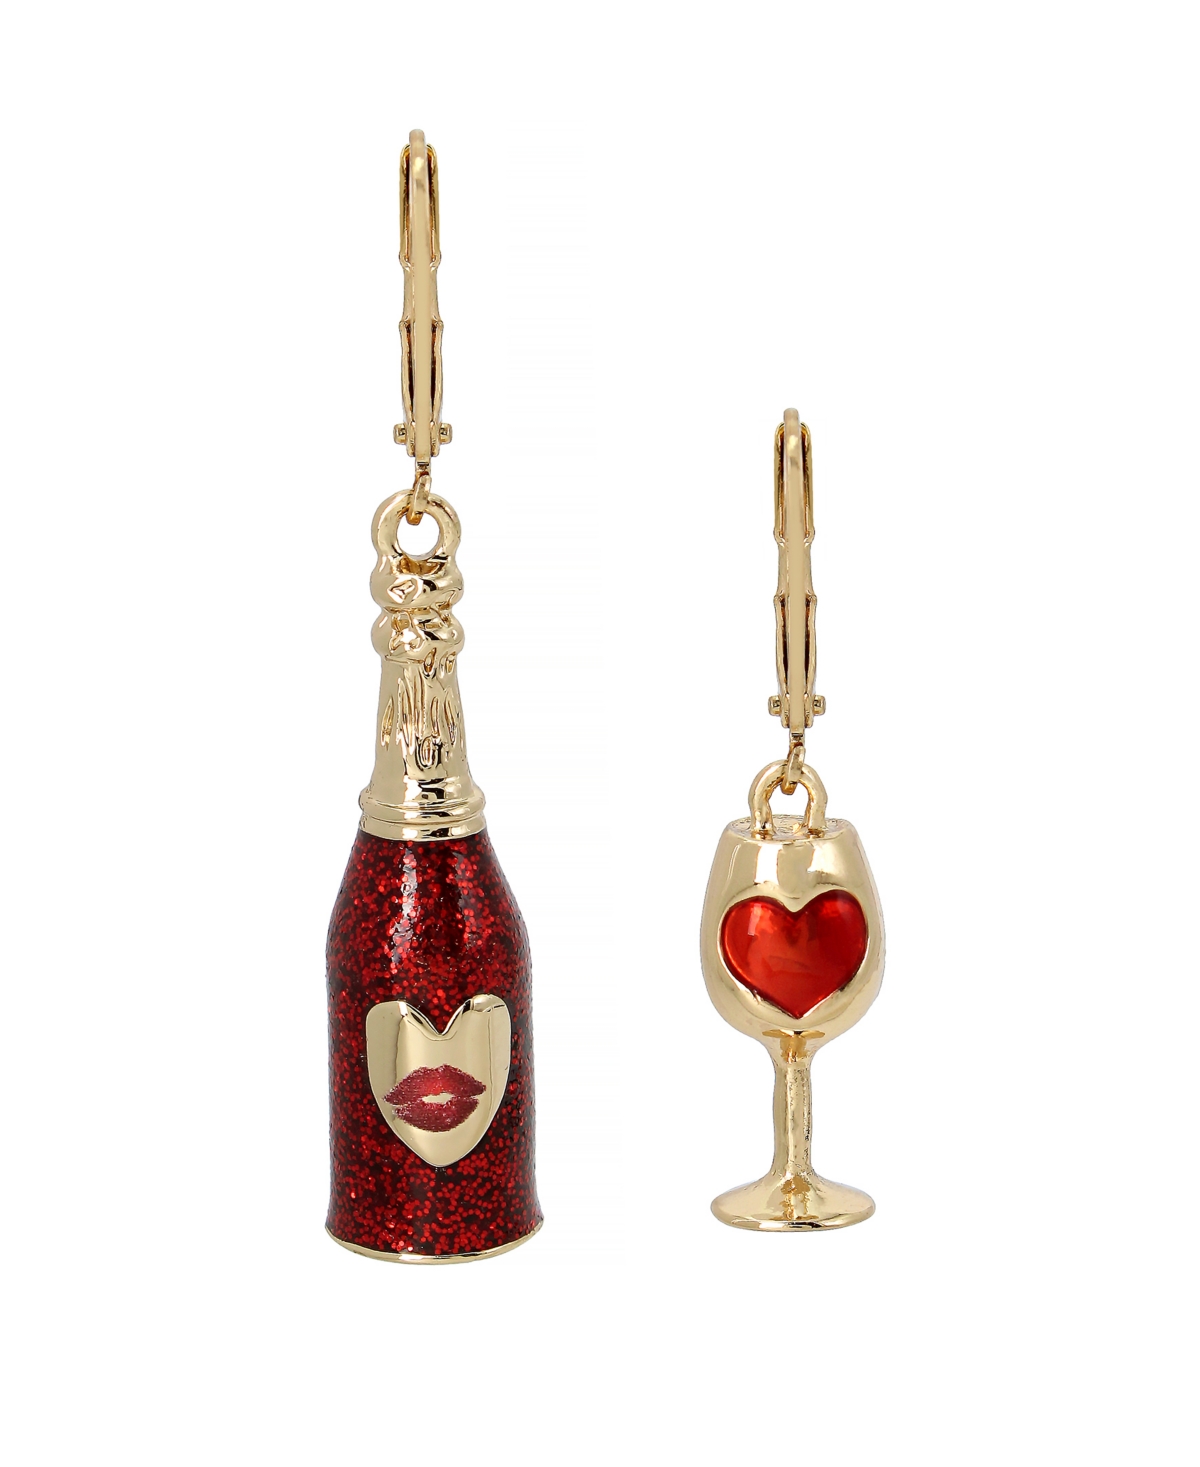 Wine Mismatched Earrings - Red